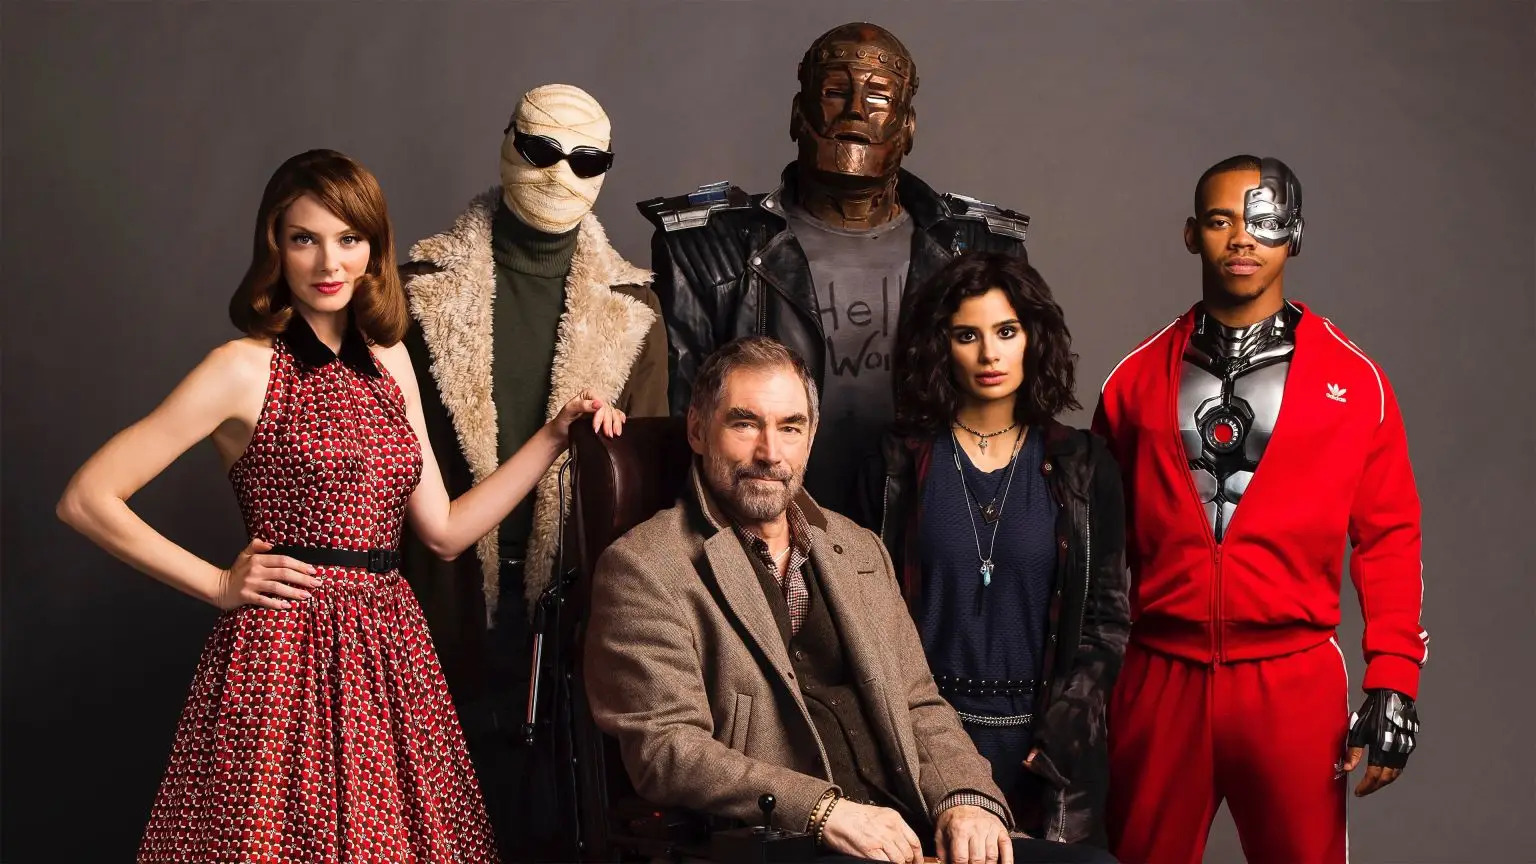 DC's Doom Patrol faces an unlikely future at the franchise